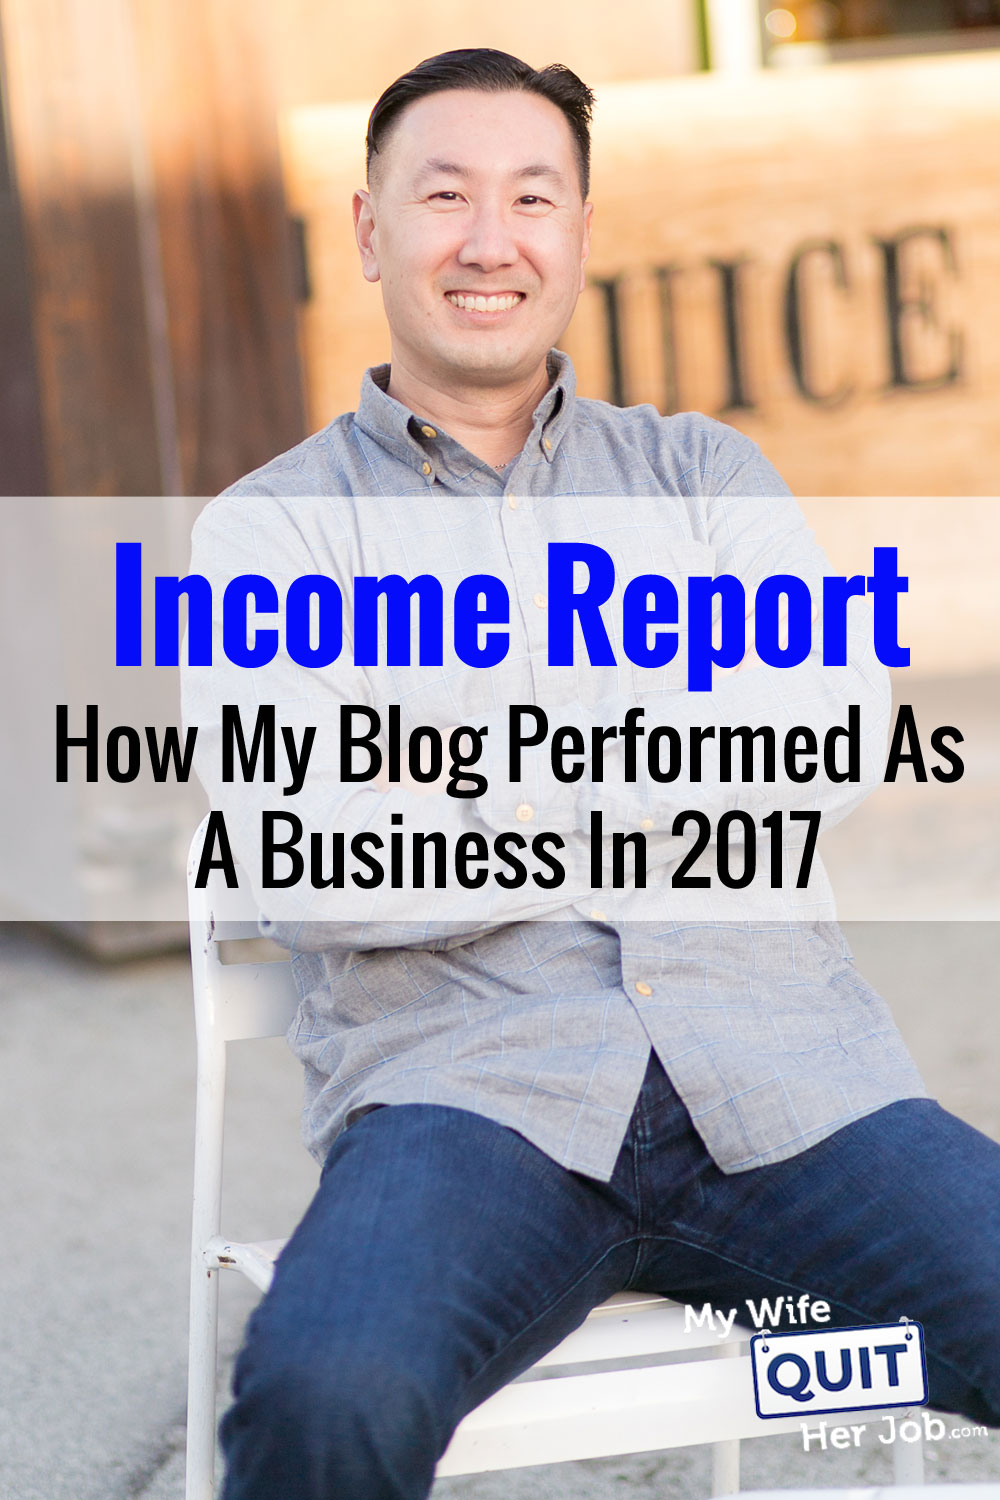 Income Report: How My Blog Performed As A Business In 2017